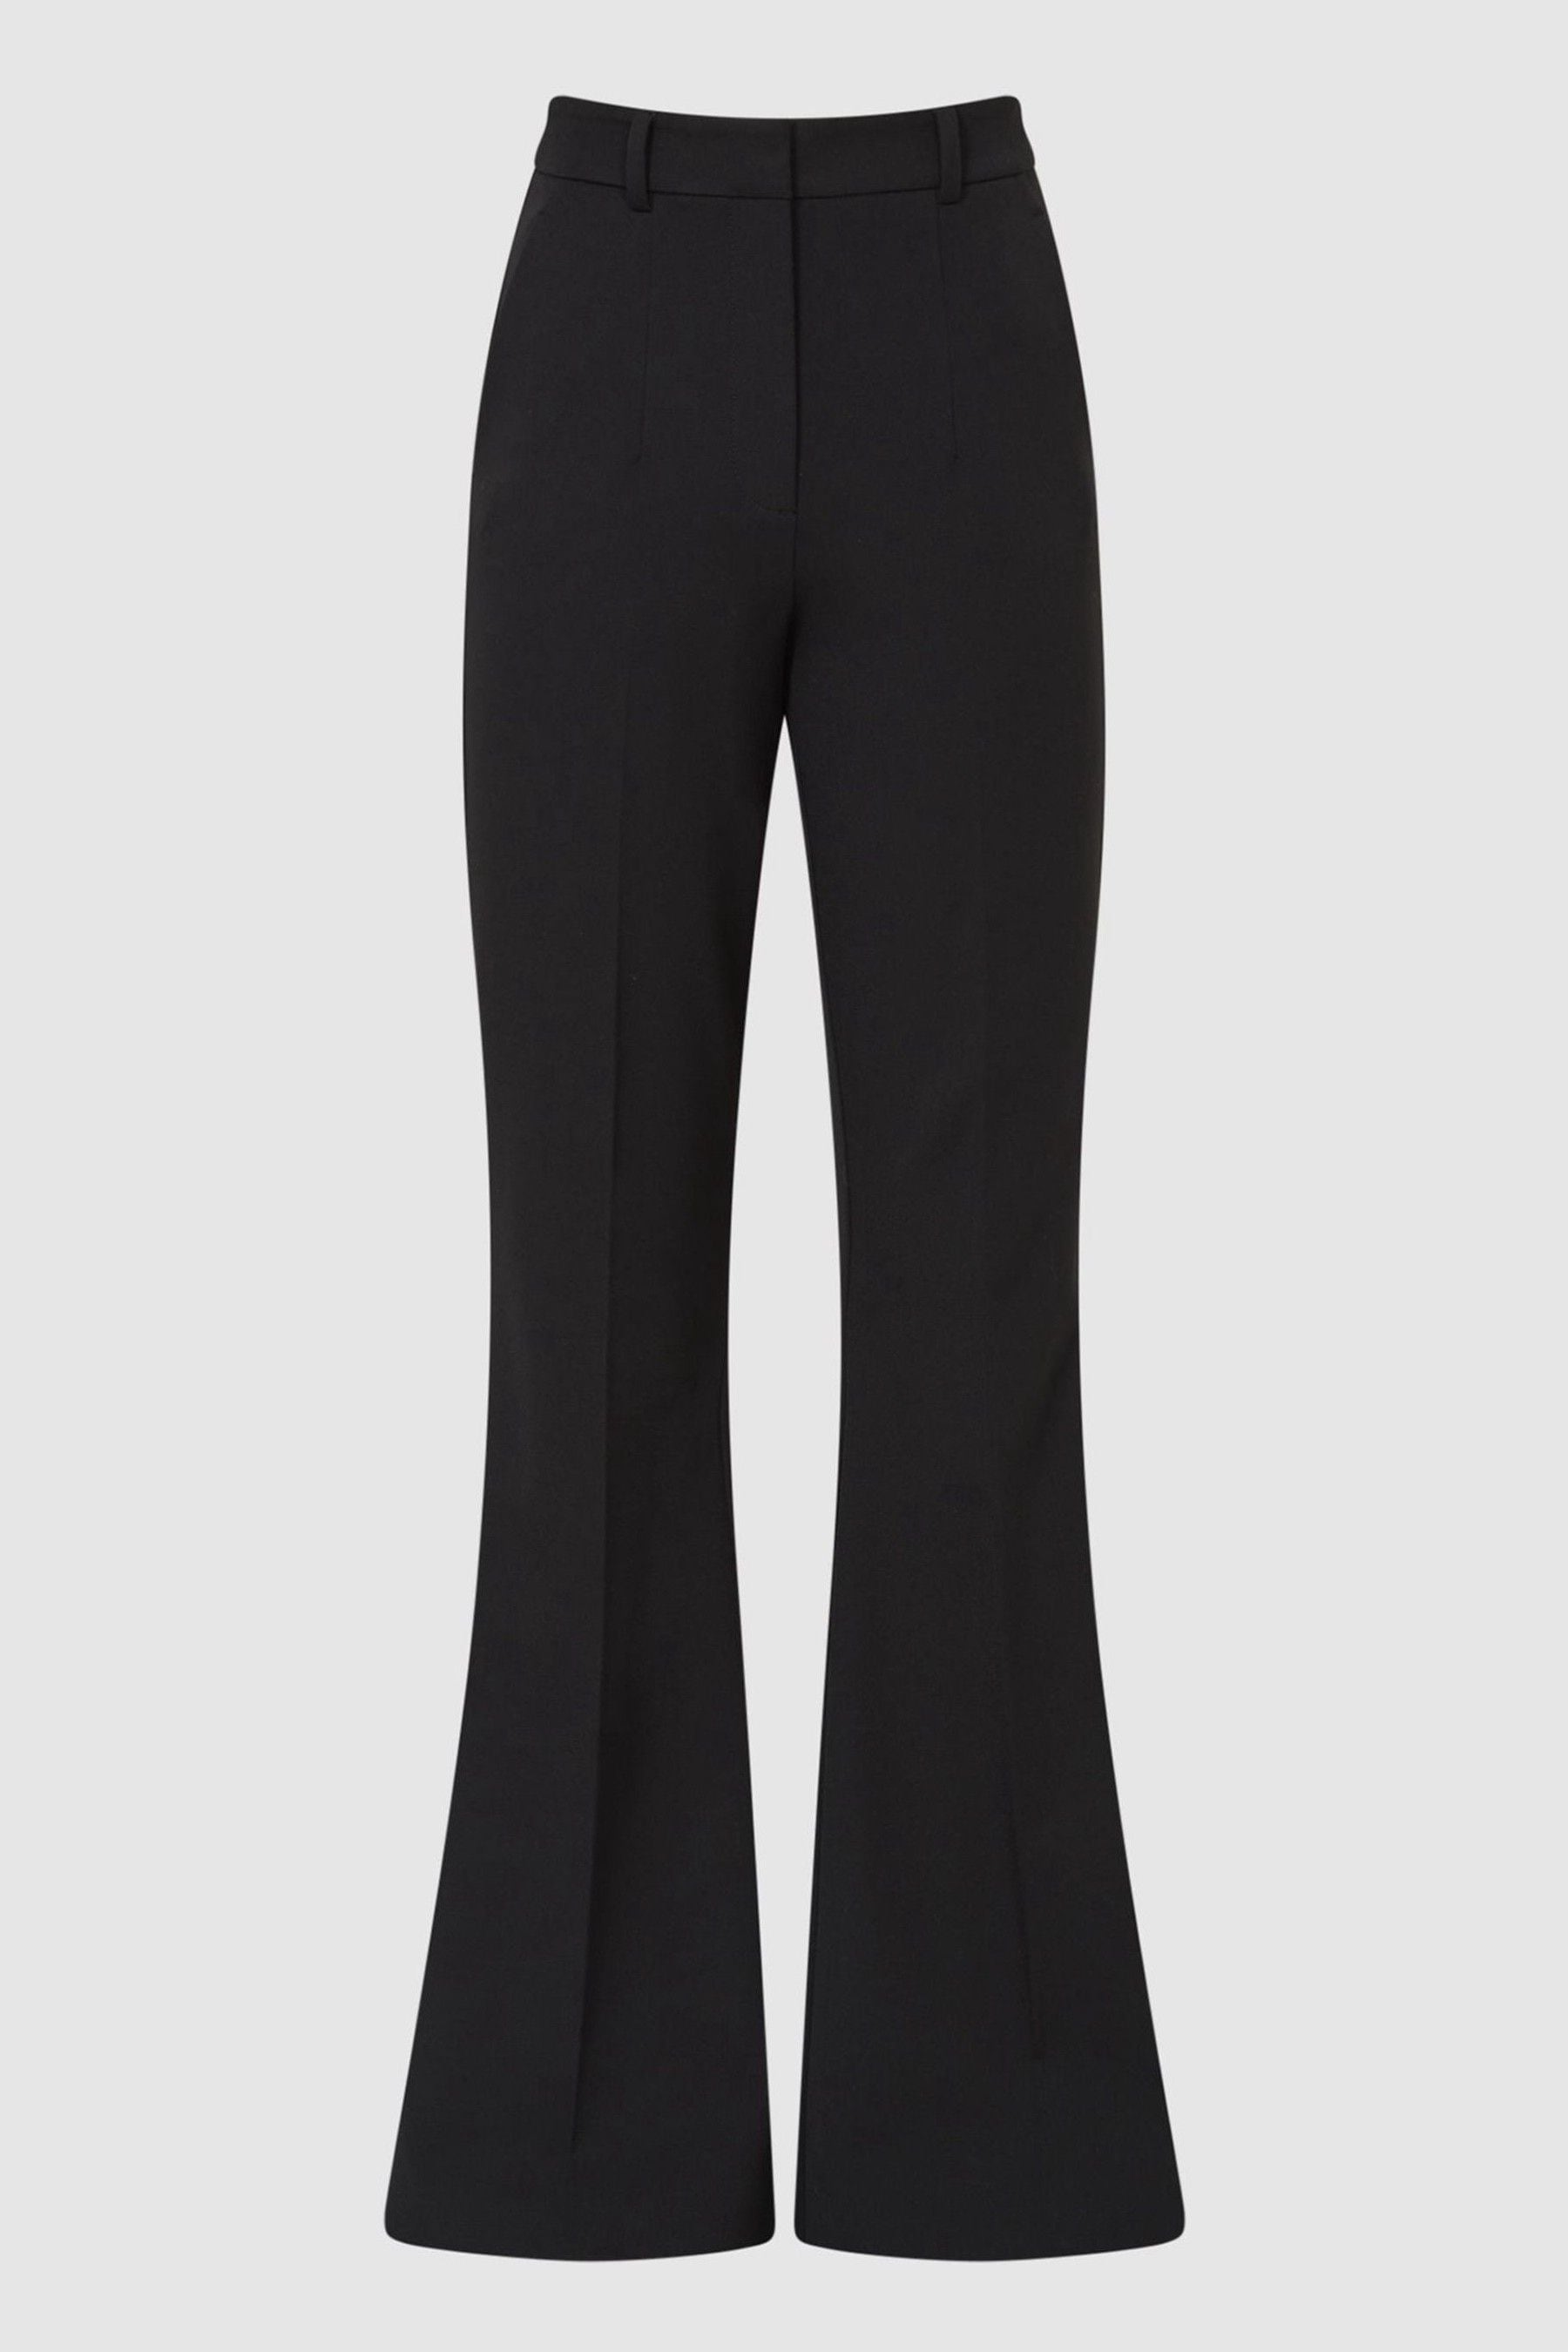 Buy Reiss Effie Extreme Flare Trousers from Next Ireland